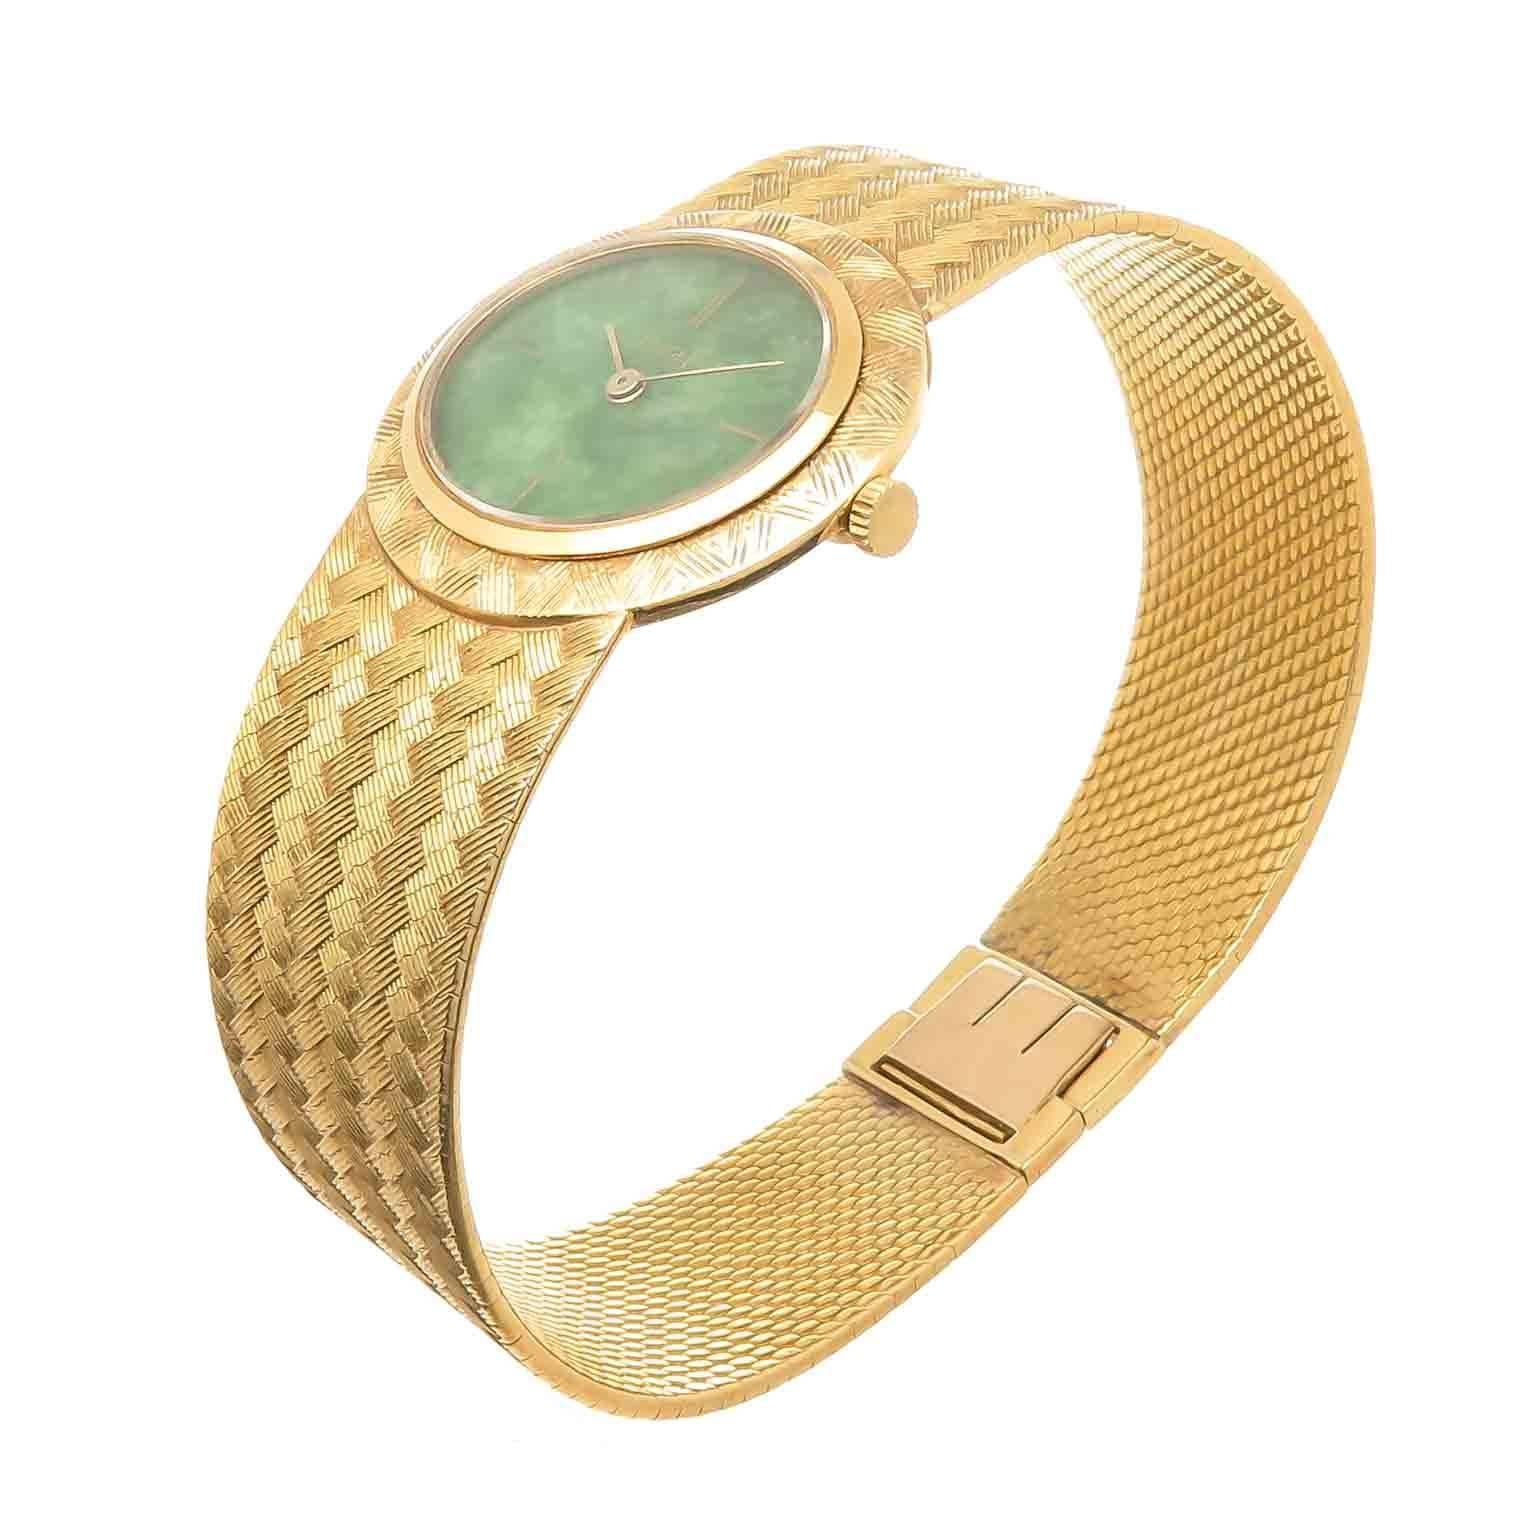 Circa 1980 Piaget 18K yellow Gold Wrist watch, 27 X 24 MM Oval case with Light textured Bezel. Mechanical winding Movement, Jadeite Stone Dial and Gold Hands. 3/4 inch wide Textured Mesh Bracelet. Total watch length 7 1/4 inch. Recently serviced and